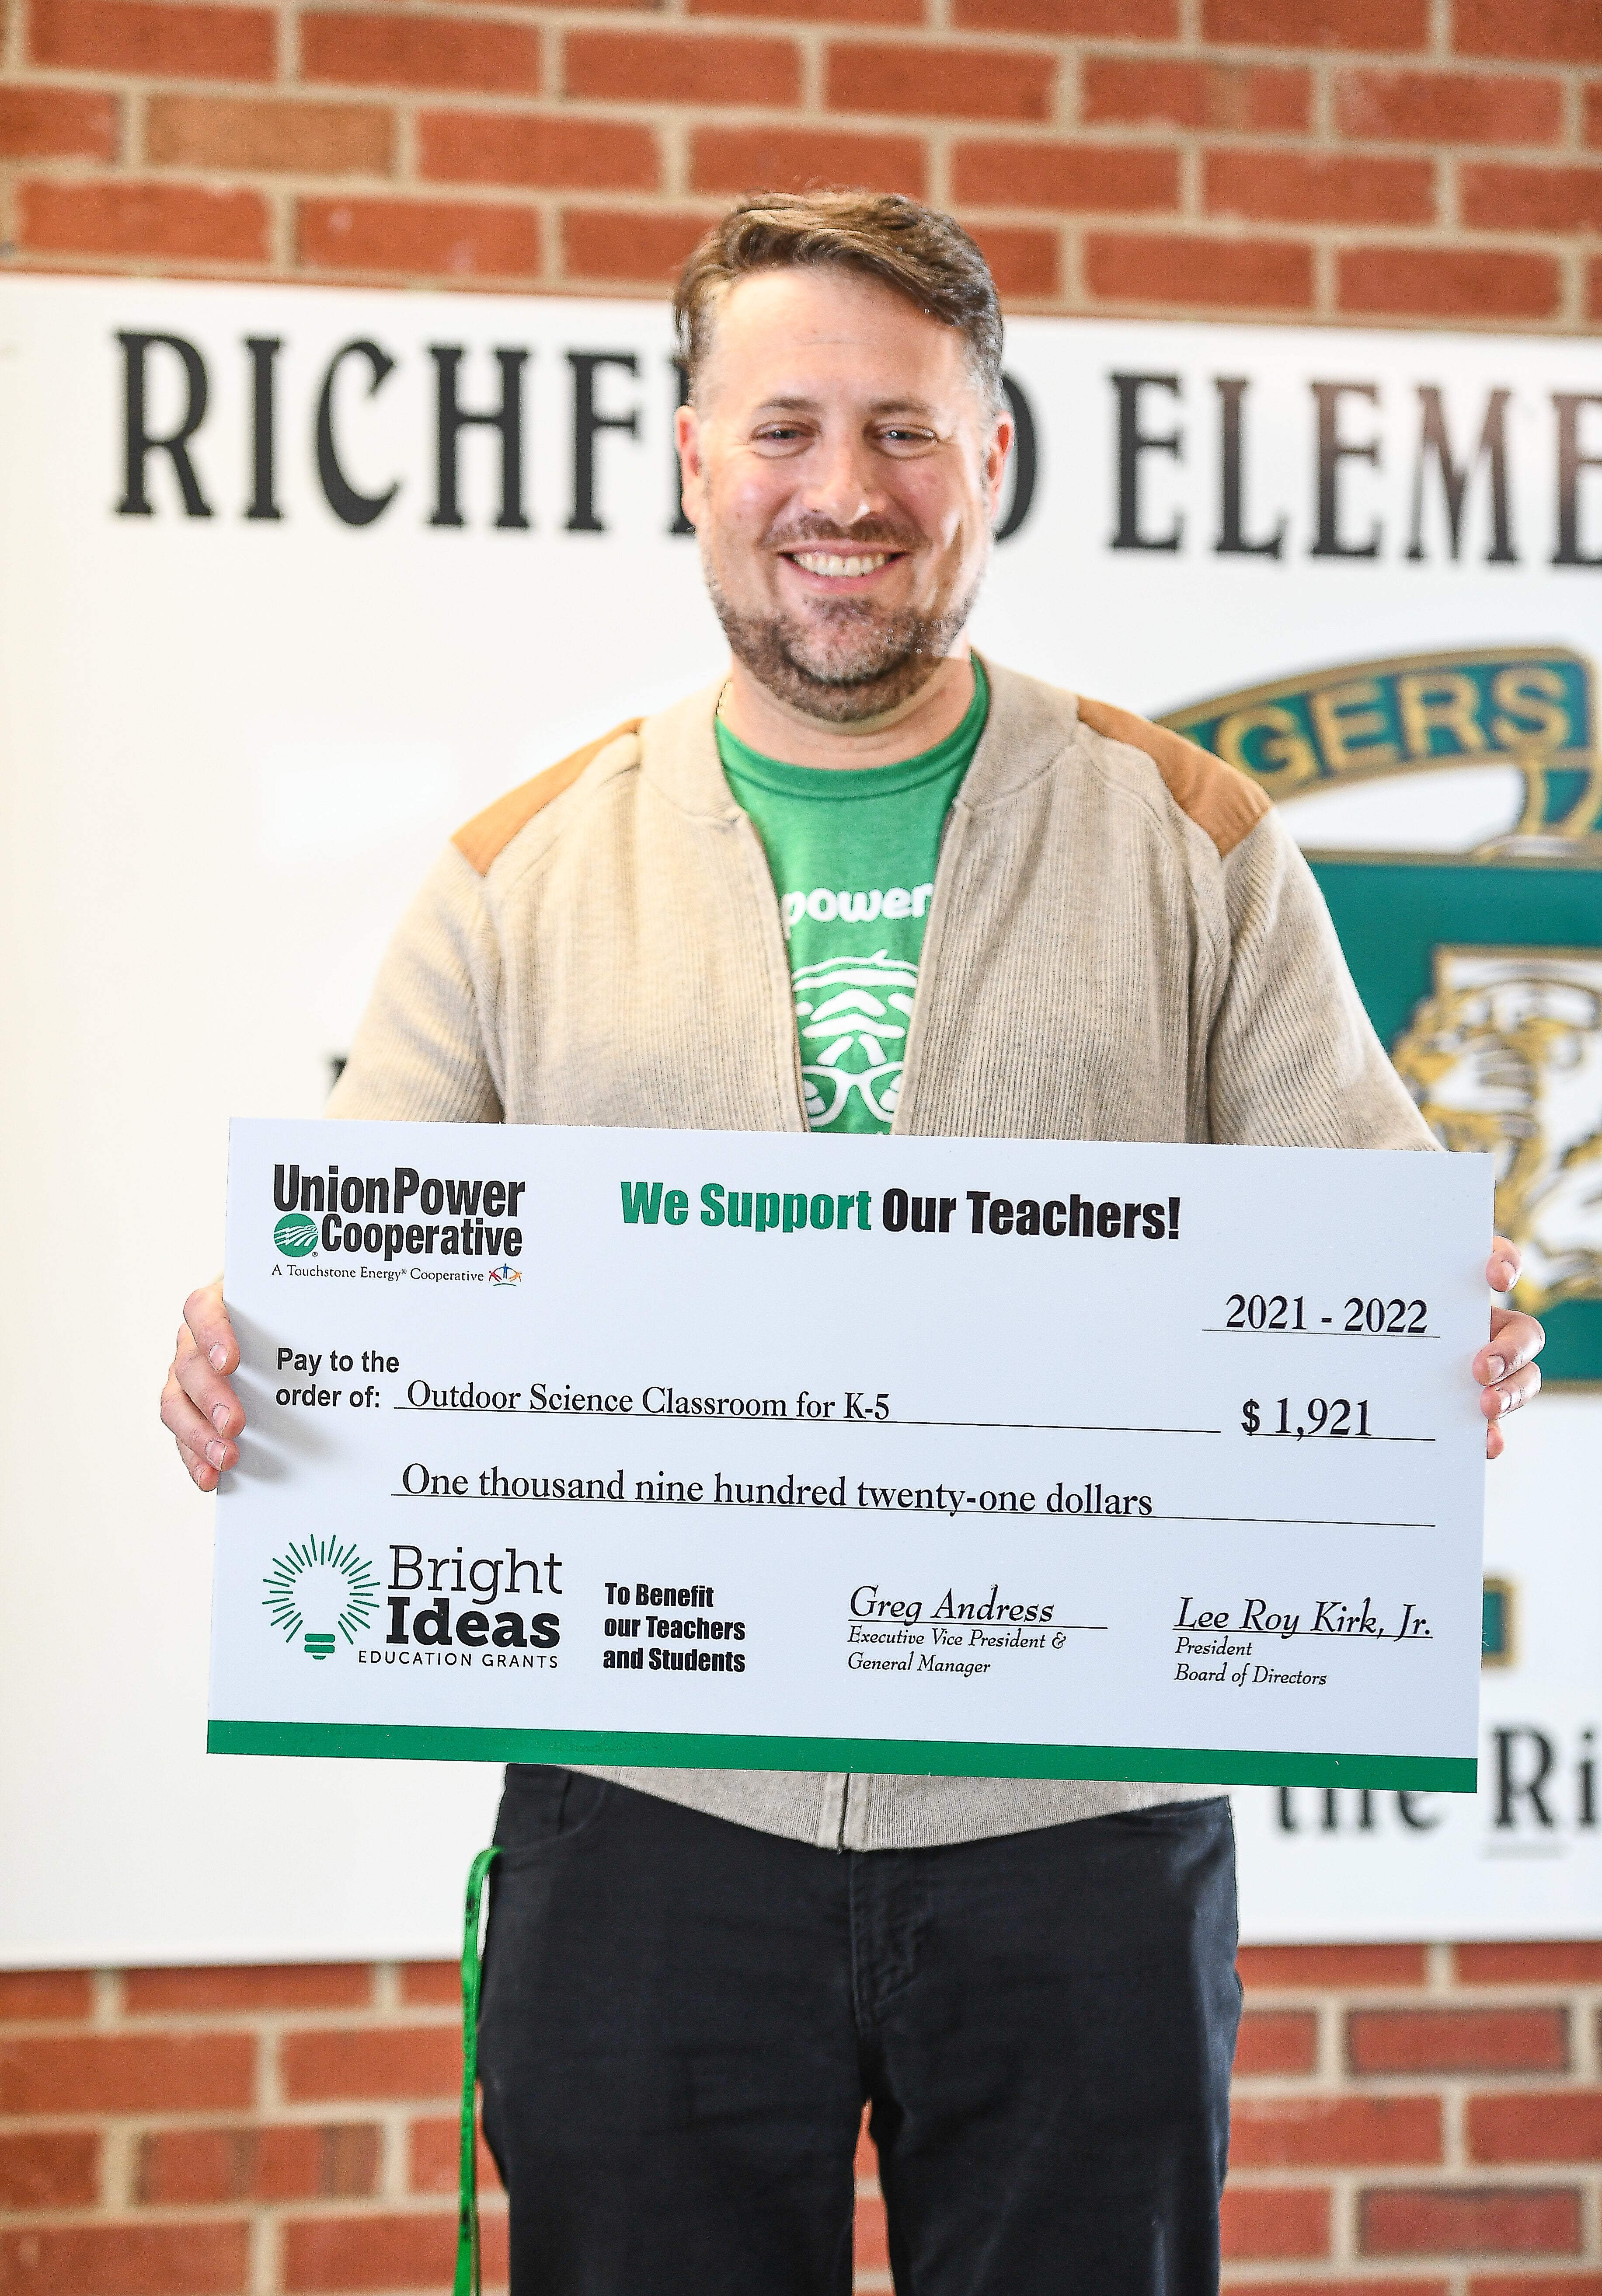 Bright Ideas grant will fund outdoor classroom, garden at Richfield – The Stanly News & Press